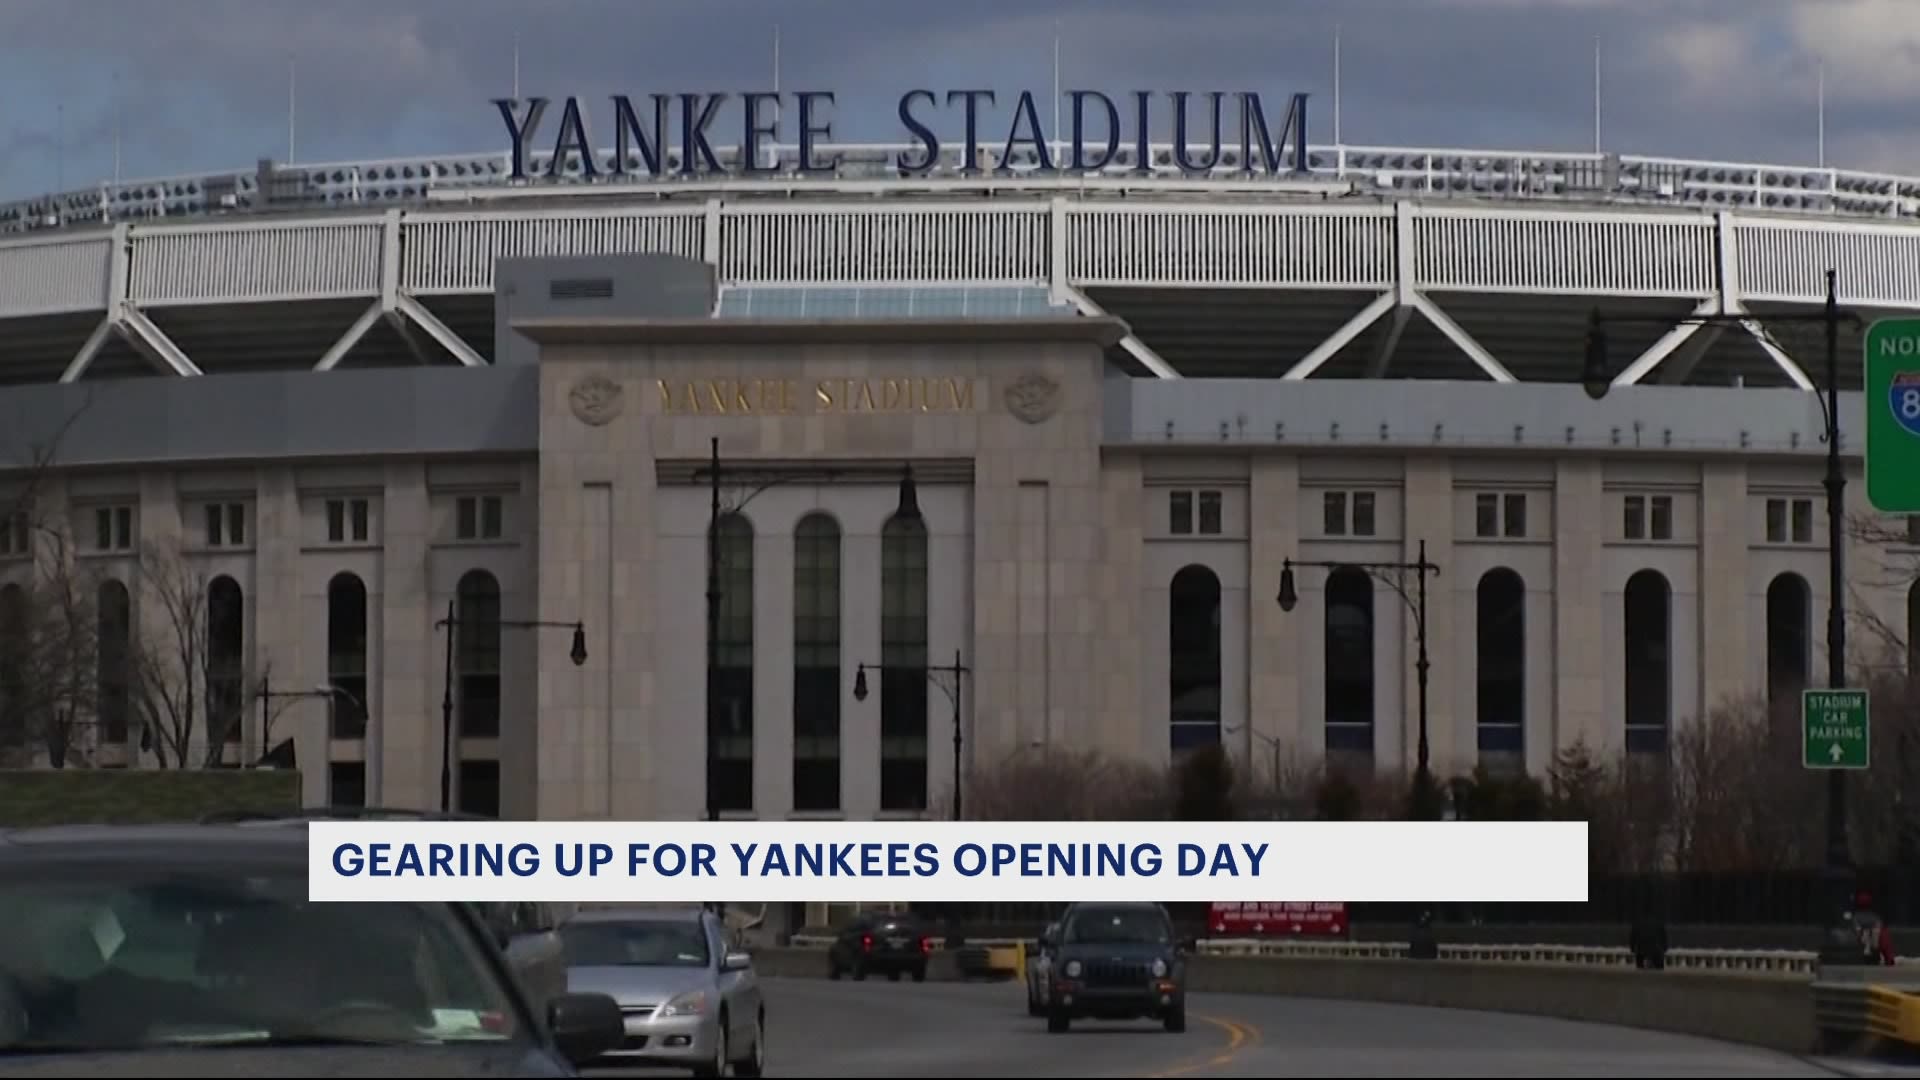 Quite a day' for Bartonsville fan as new Yankee Stadium opens